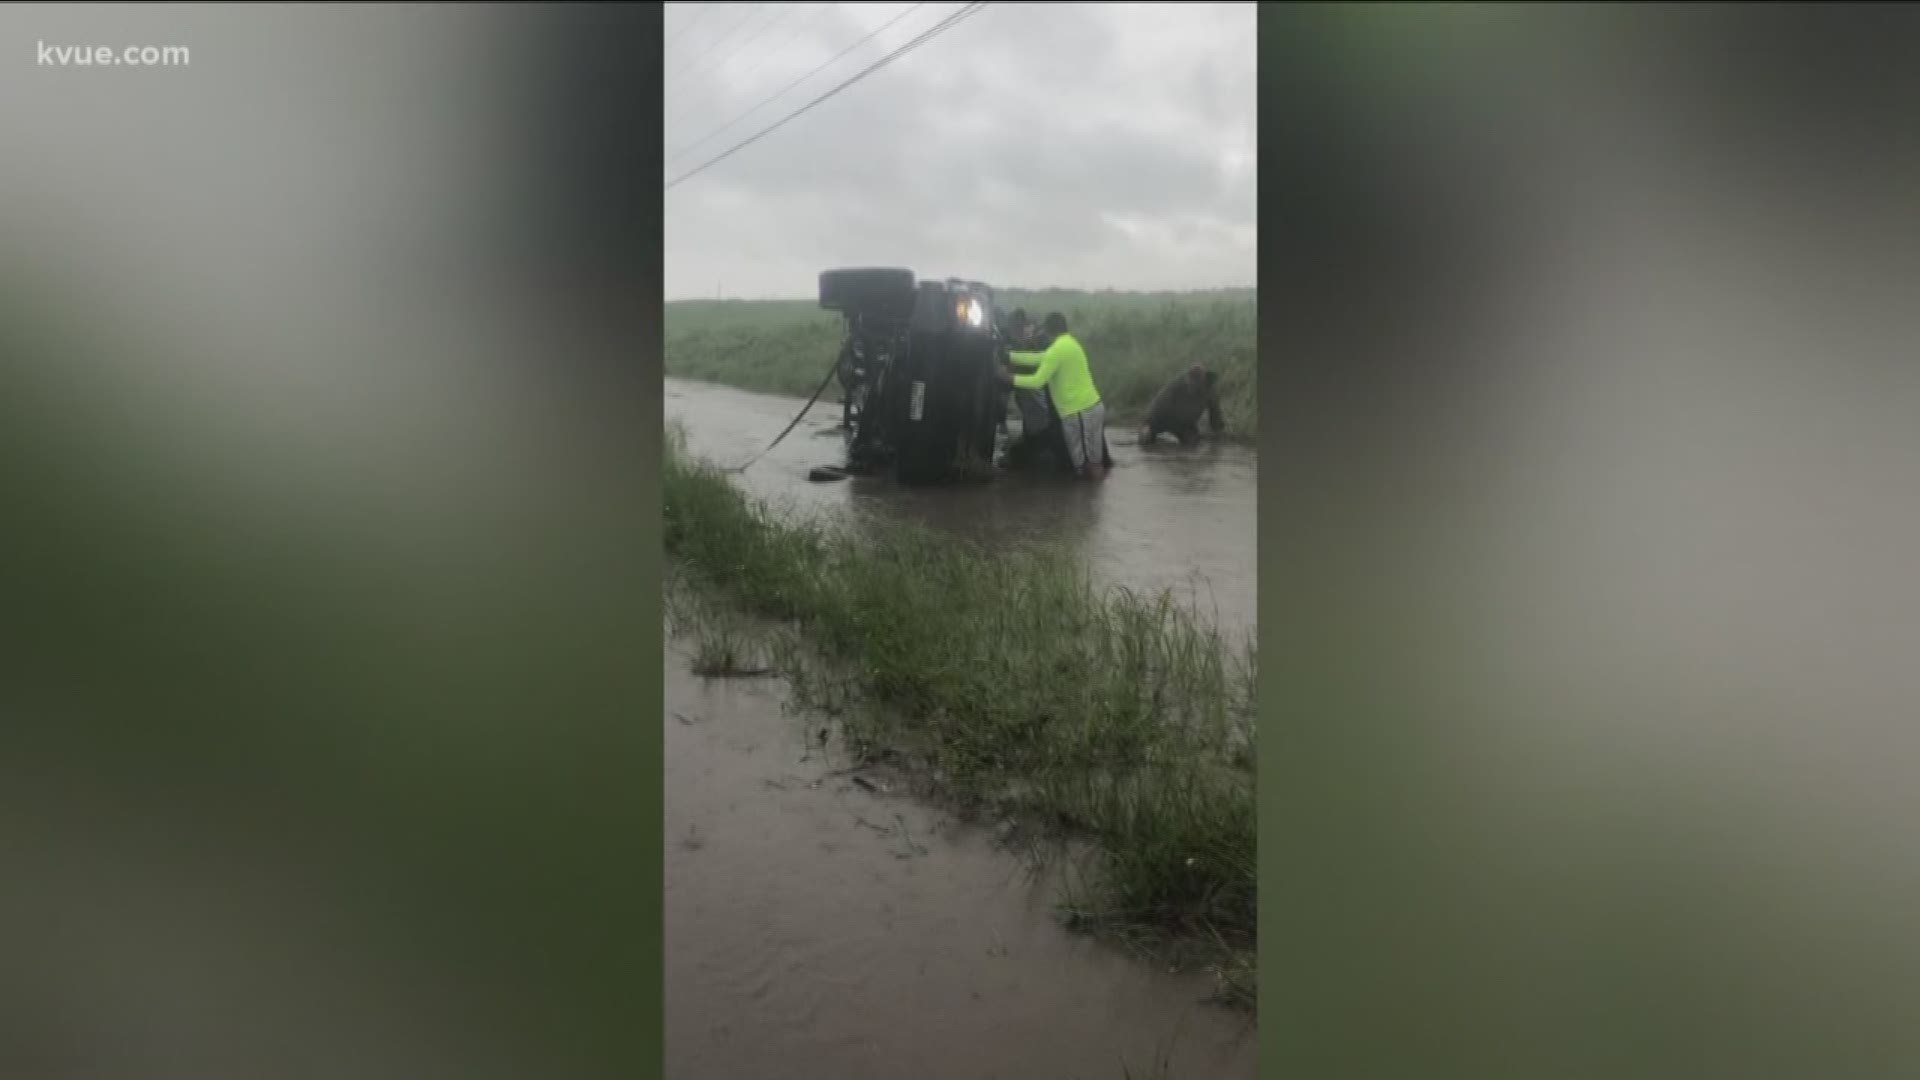 A witness tells KVUE this truck rolled on Highway 79 between Thorndale and Thrall.